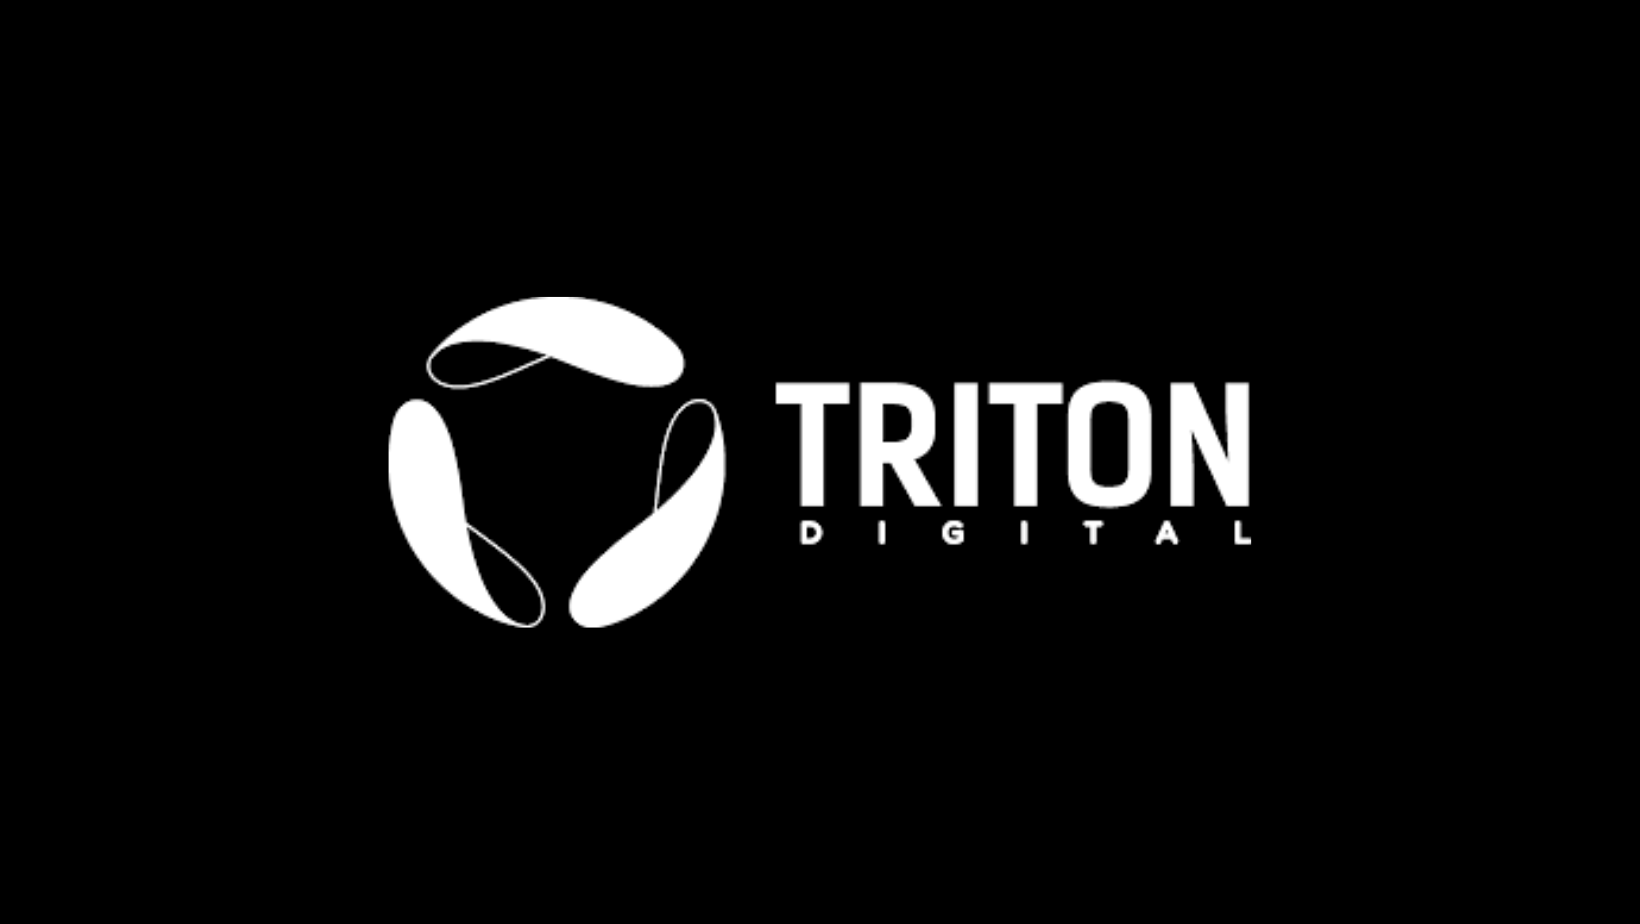 Triton Digital Partners with Frequency to Empower Podcasters and Streaming Audio Publishers with Enhanced Creative Capabilities